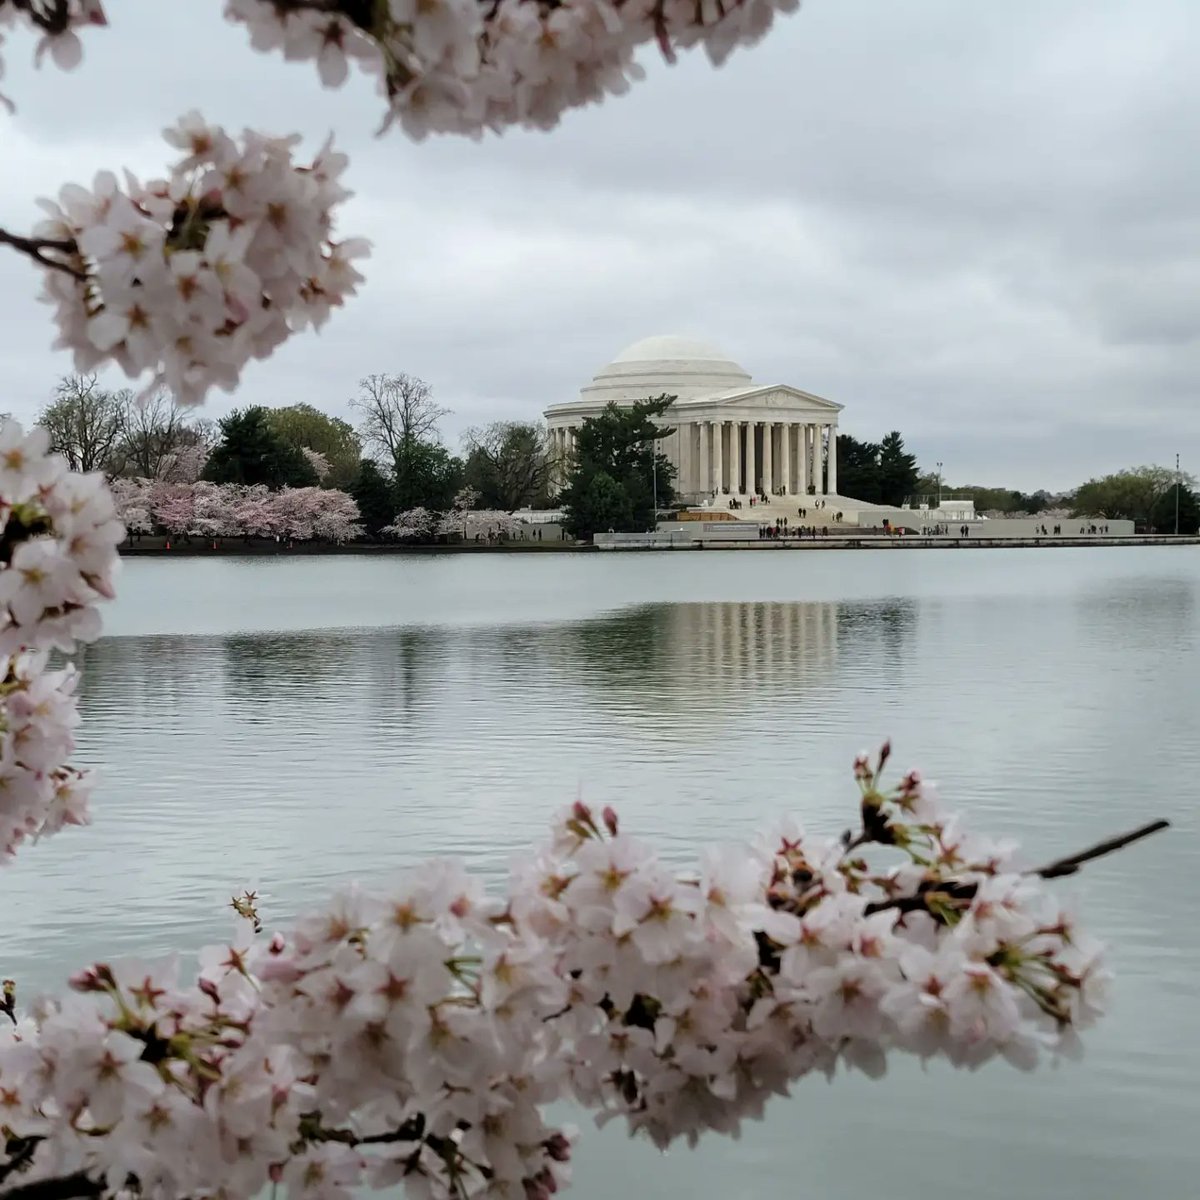 Two days, over 50,000 steps, and chilly rain, but a great weekend getaway to see more of DC area.